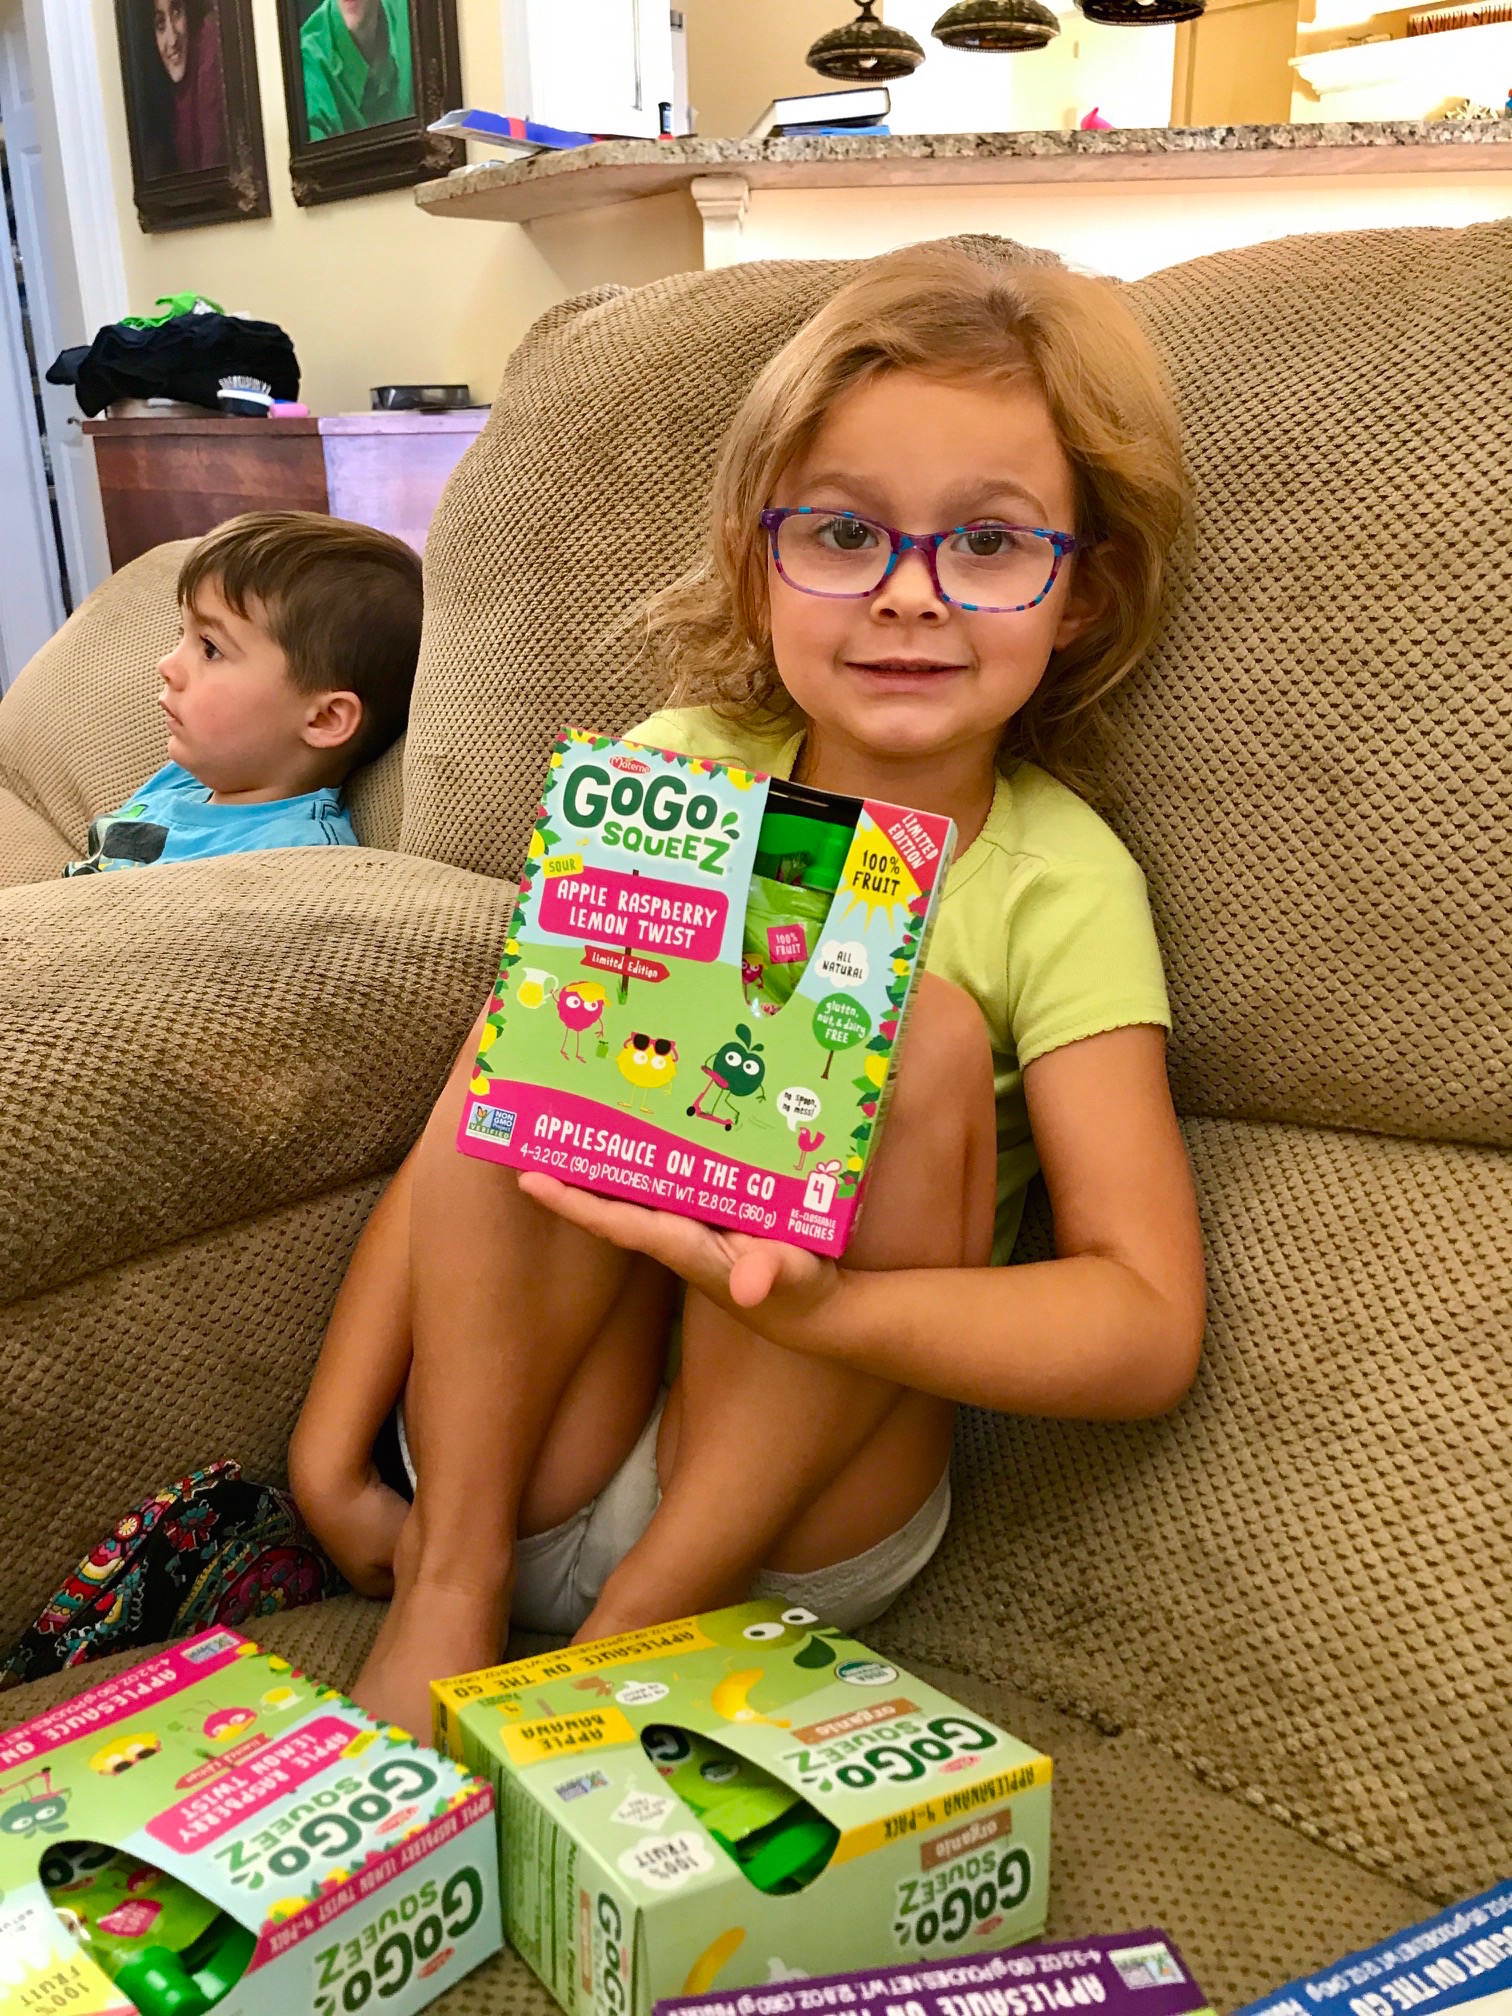 GoGo squeeZ and Grandkids Go Together Like Peanut Butter and Jelly